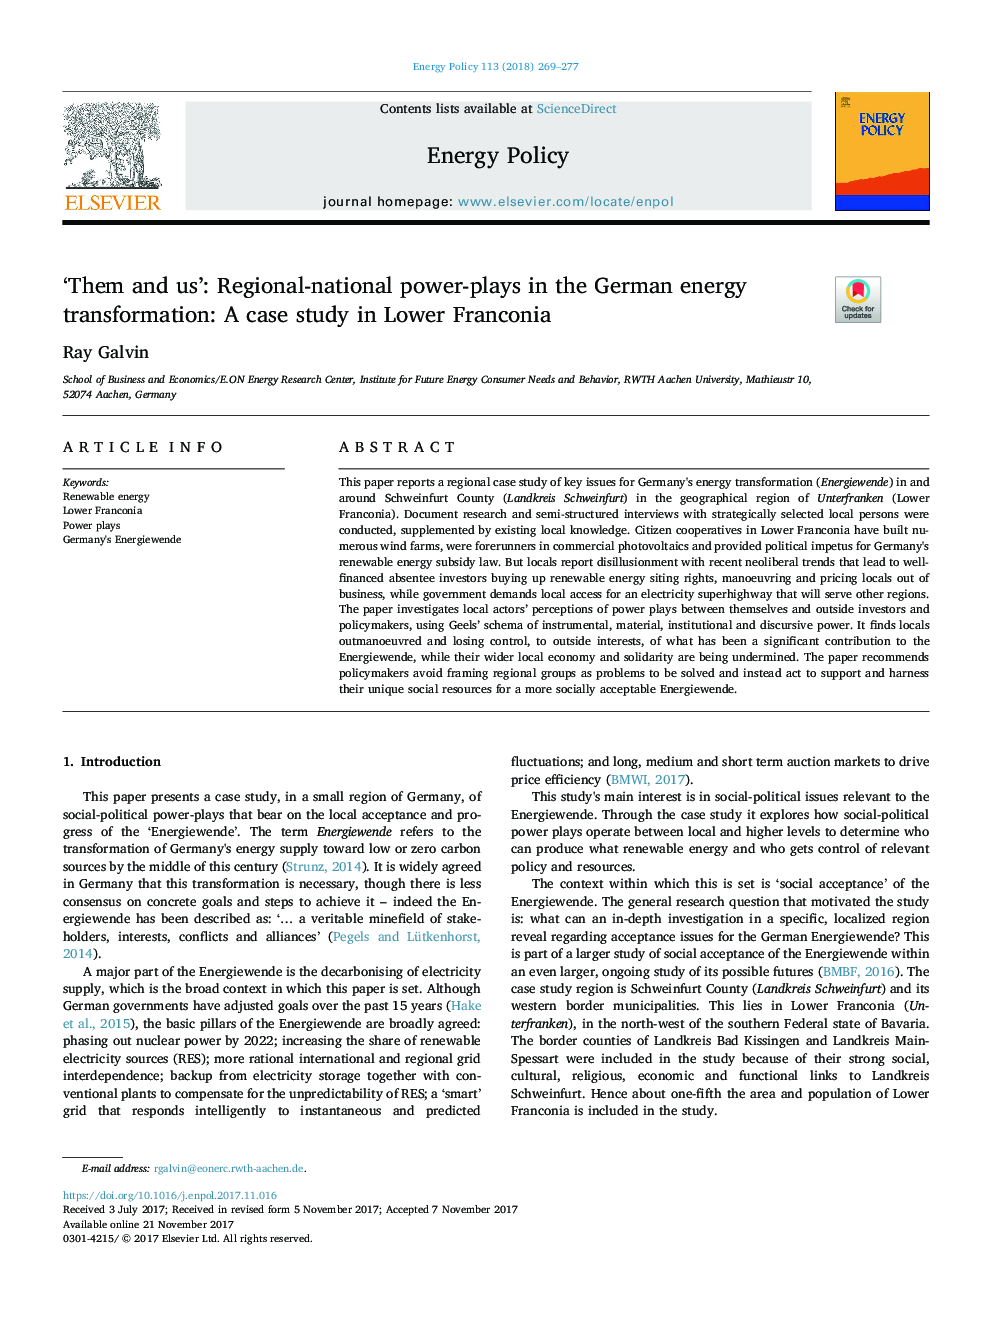 'Them and us': Regional-national power-plays in the German energy transformation: A case study in Lower Franconia